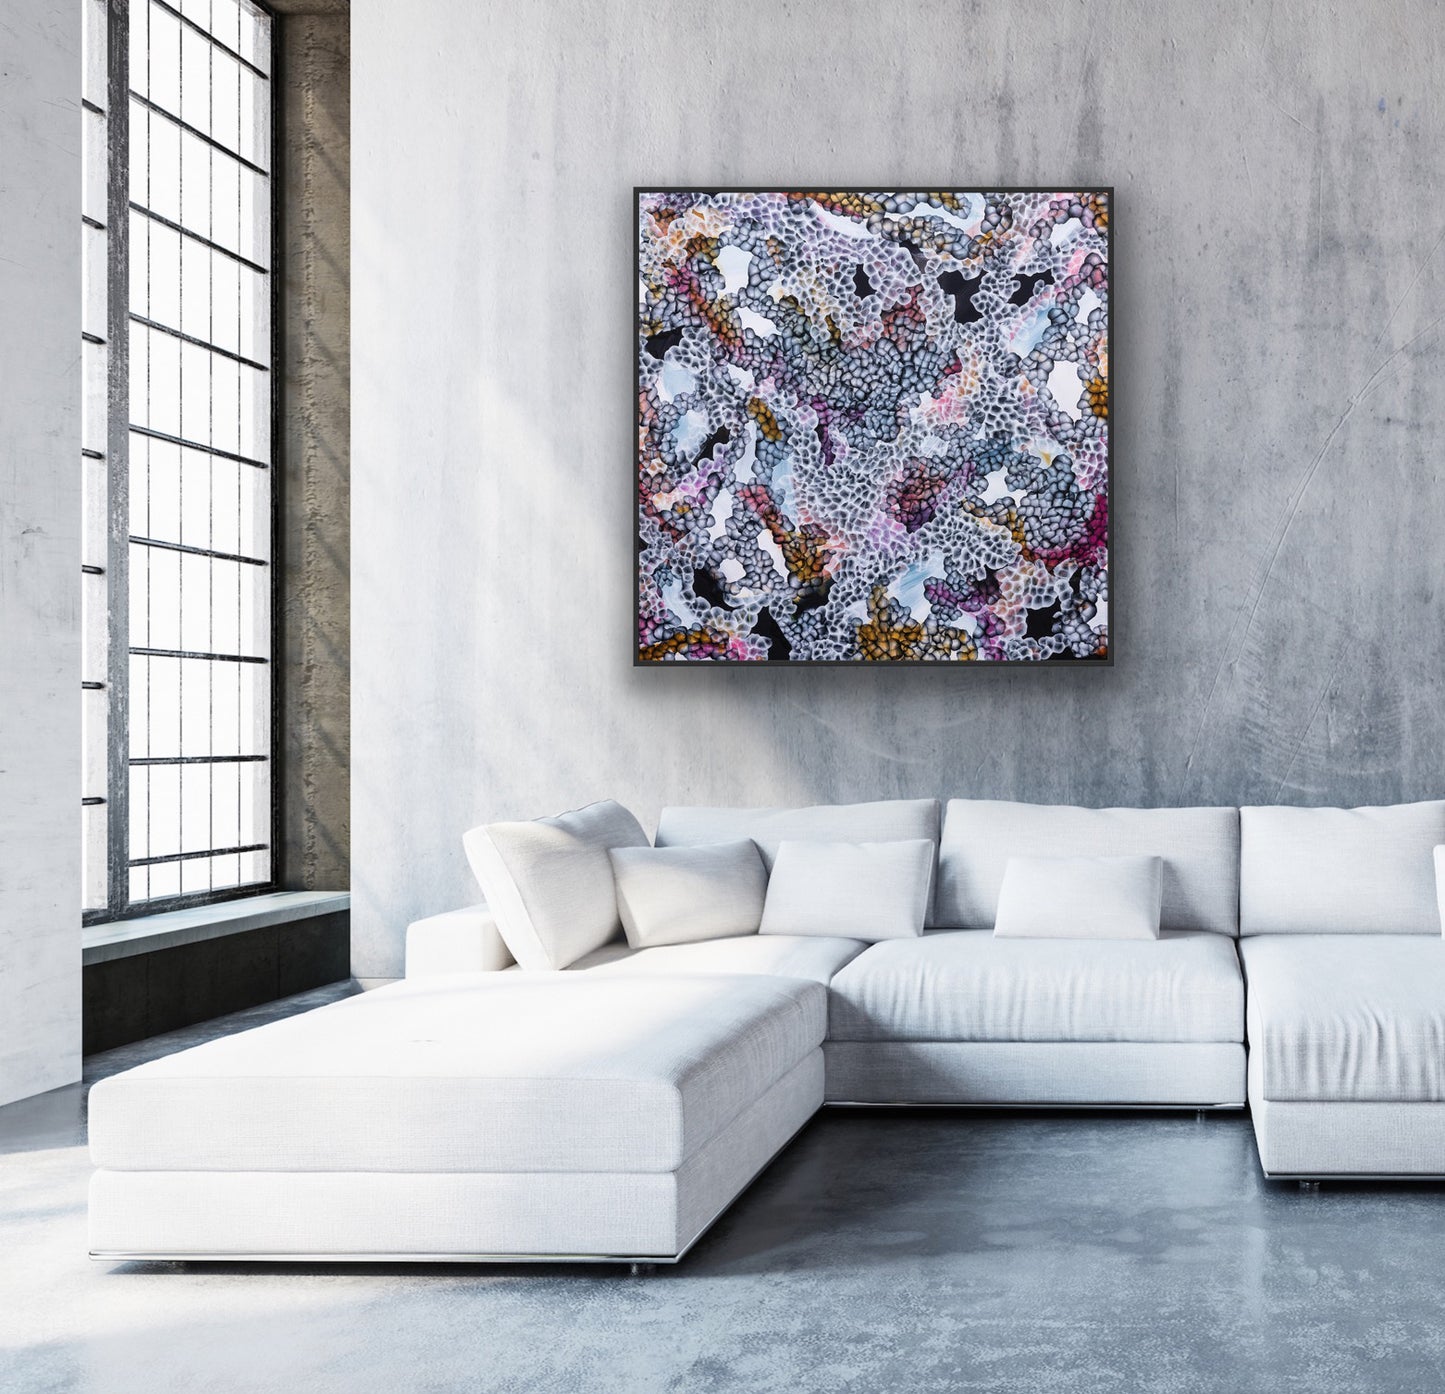 Bio Bloom Reef Song VII - Large Abstract Sealife Painting